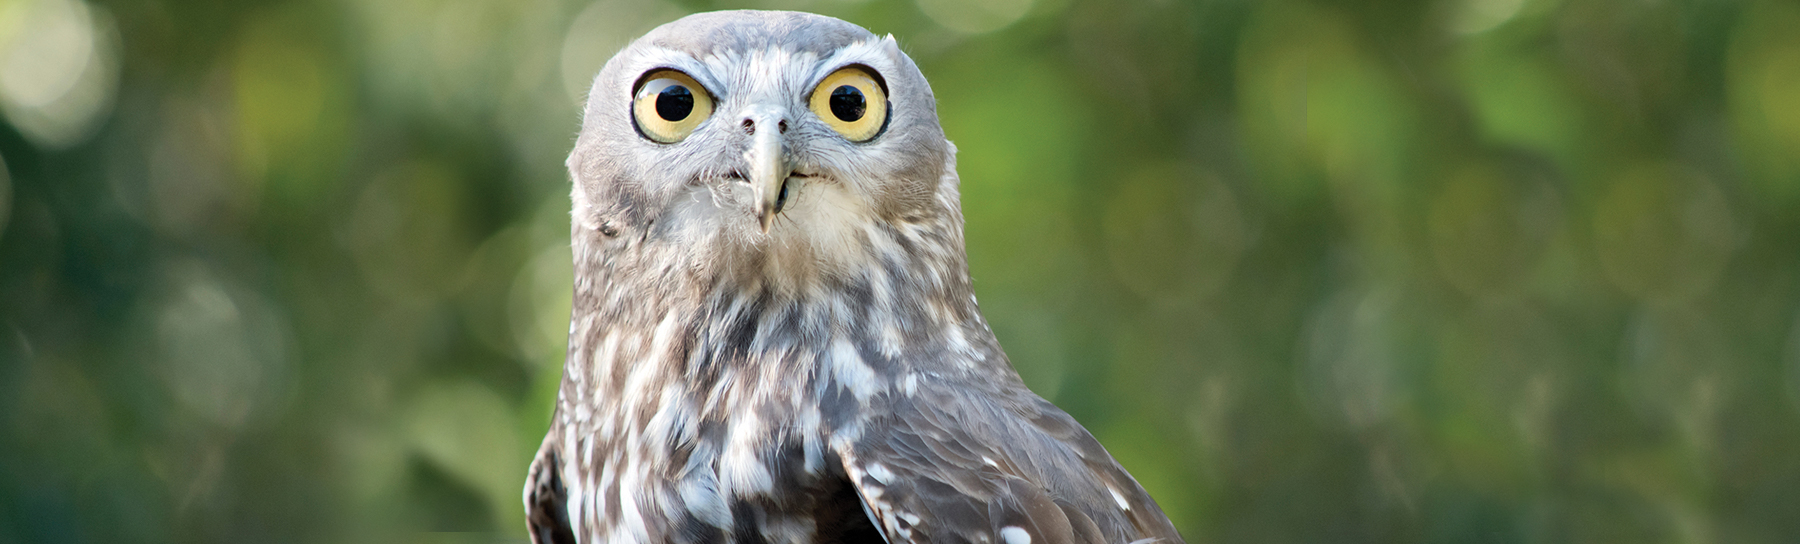 Owl-Donate-Page-Banner.jpg